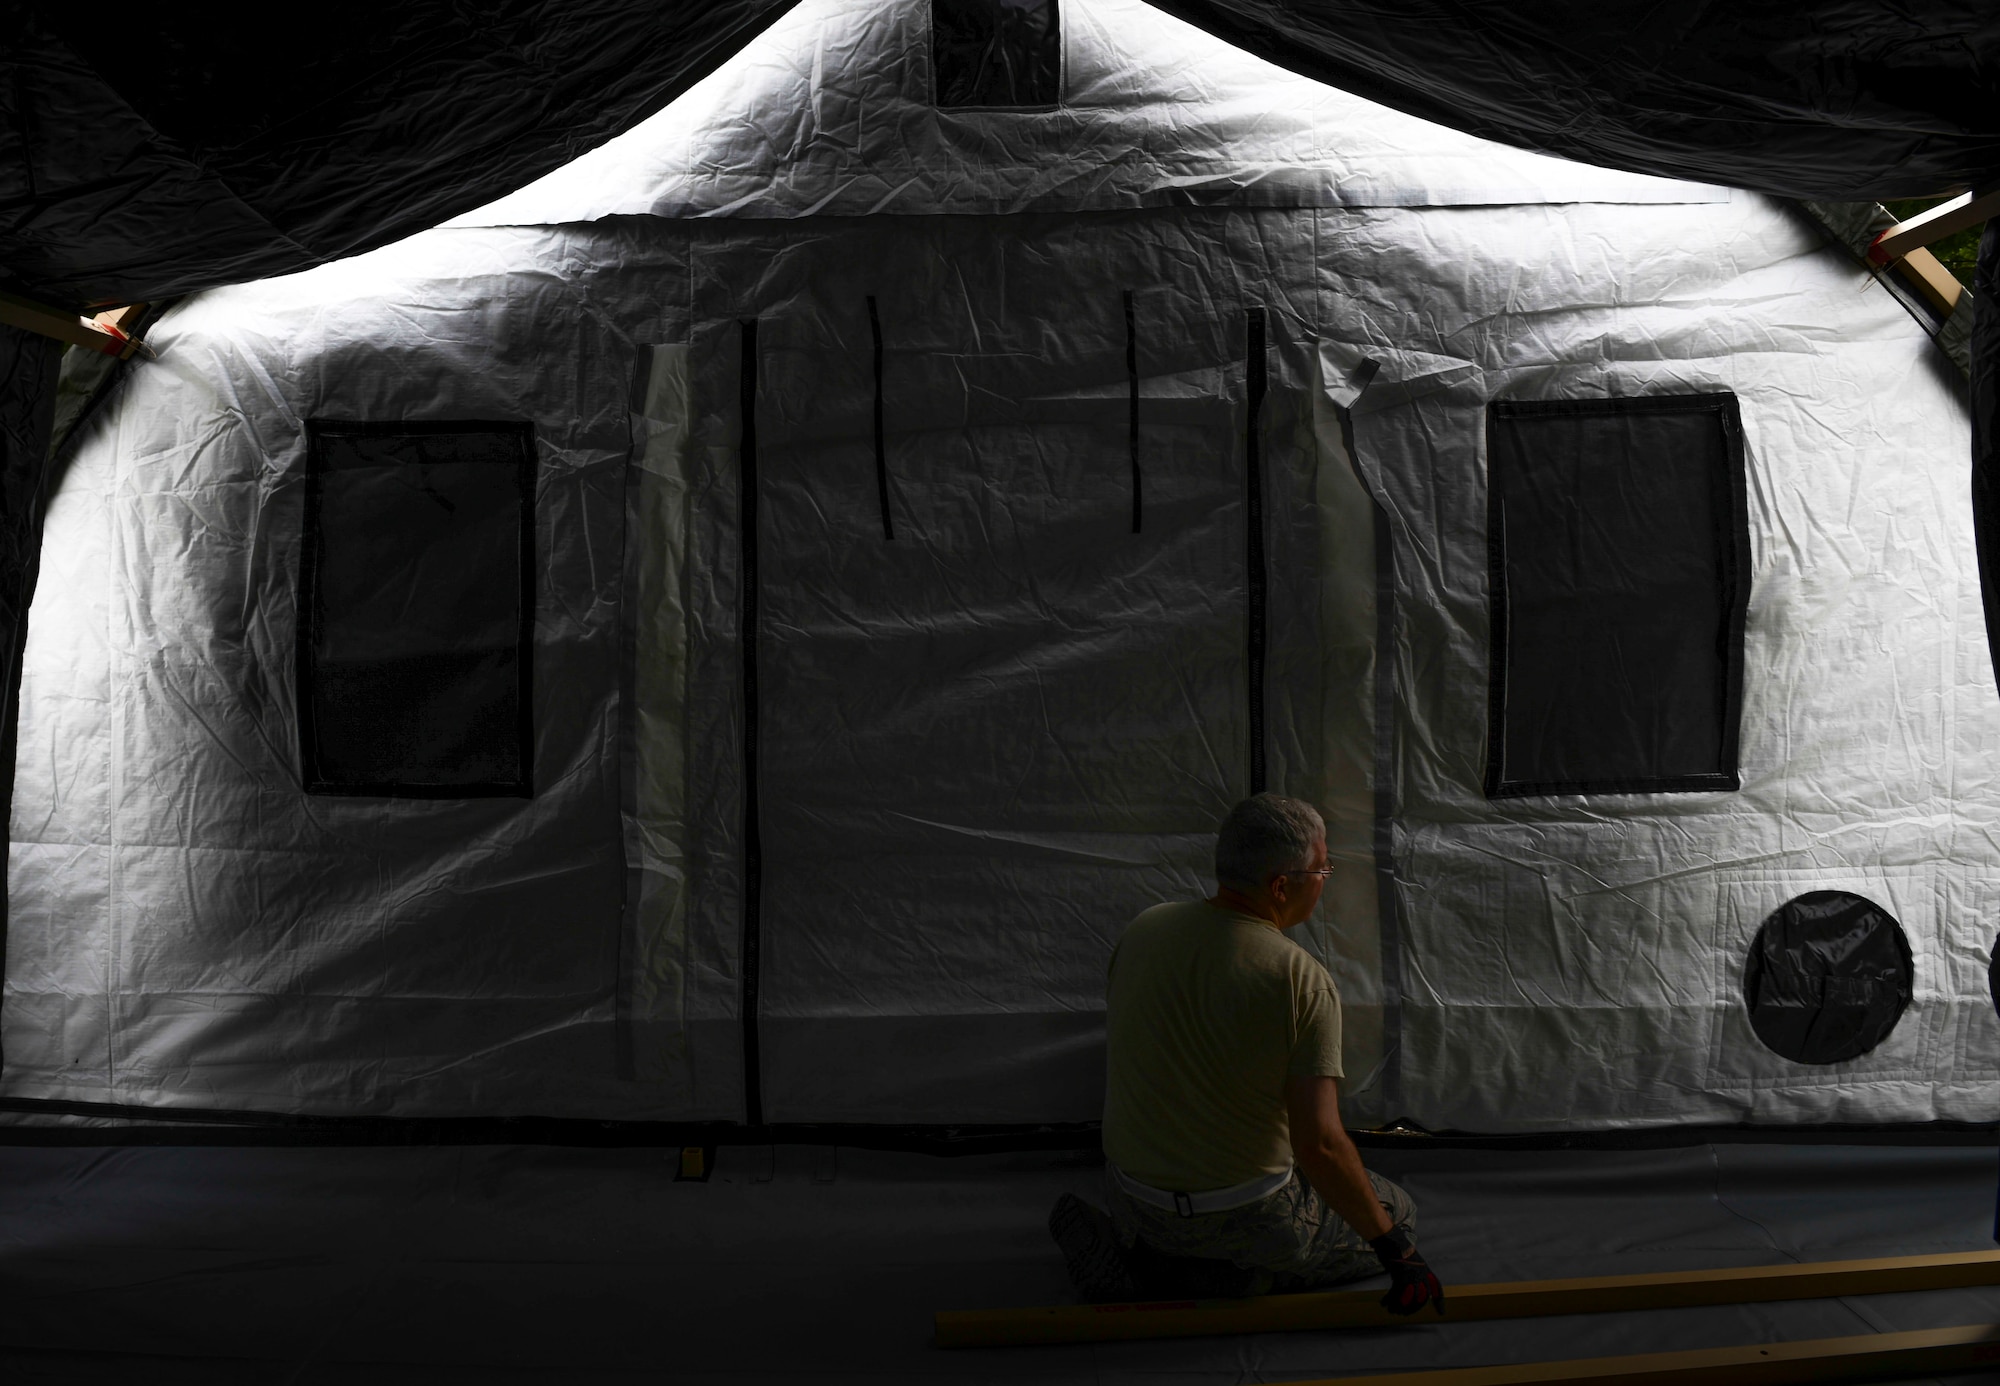 An Expeditionary Medical Support tent is nearing completion during an exercise at Yokota Air Base, Japan, May 14, 2014.  EMEDS tents have a fully functioning pharmacy, laboratory, dental and mental health clinics to treat patients. (U.S. Air Force photo by Airman 1st Class Meagan Schutter/Released)